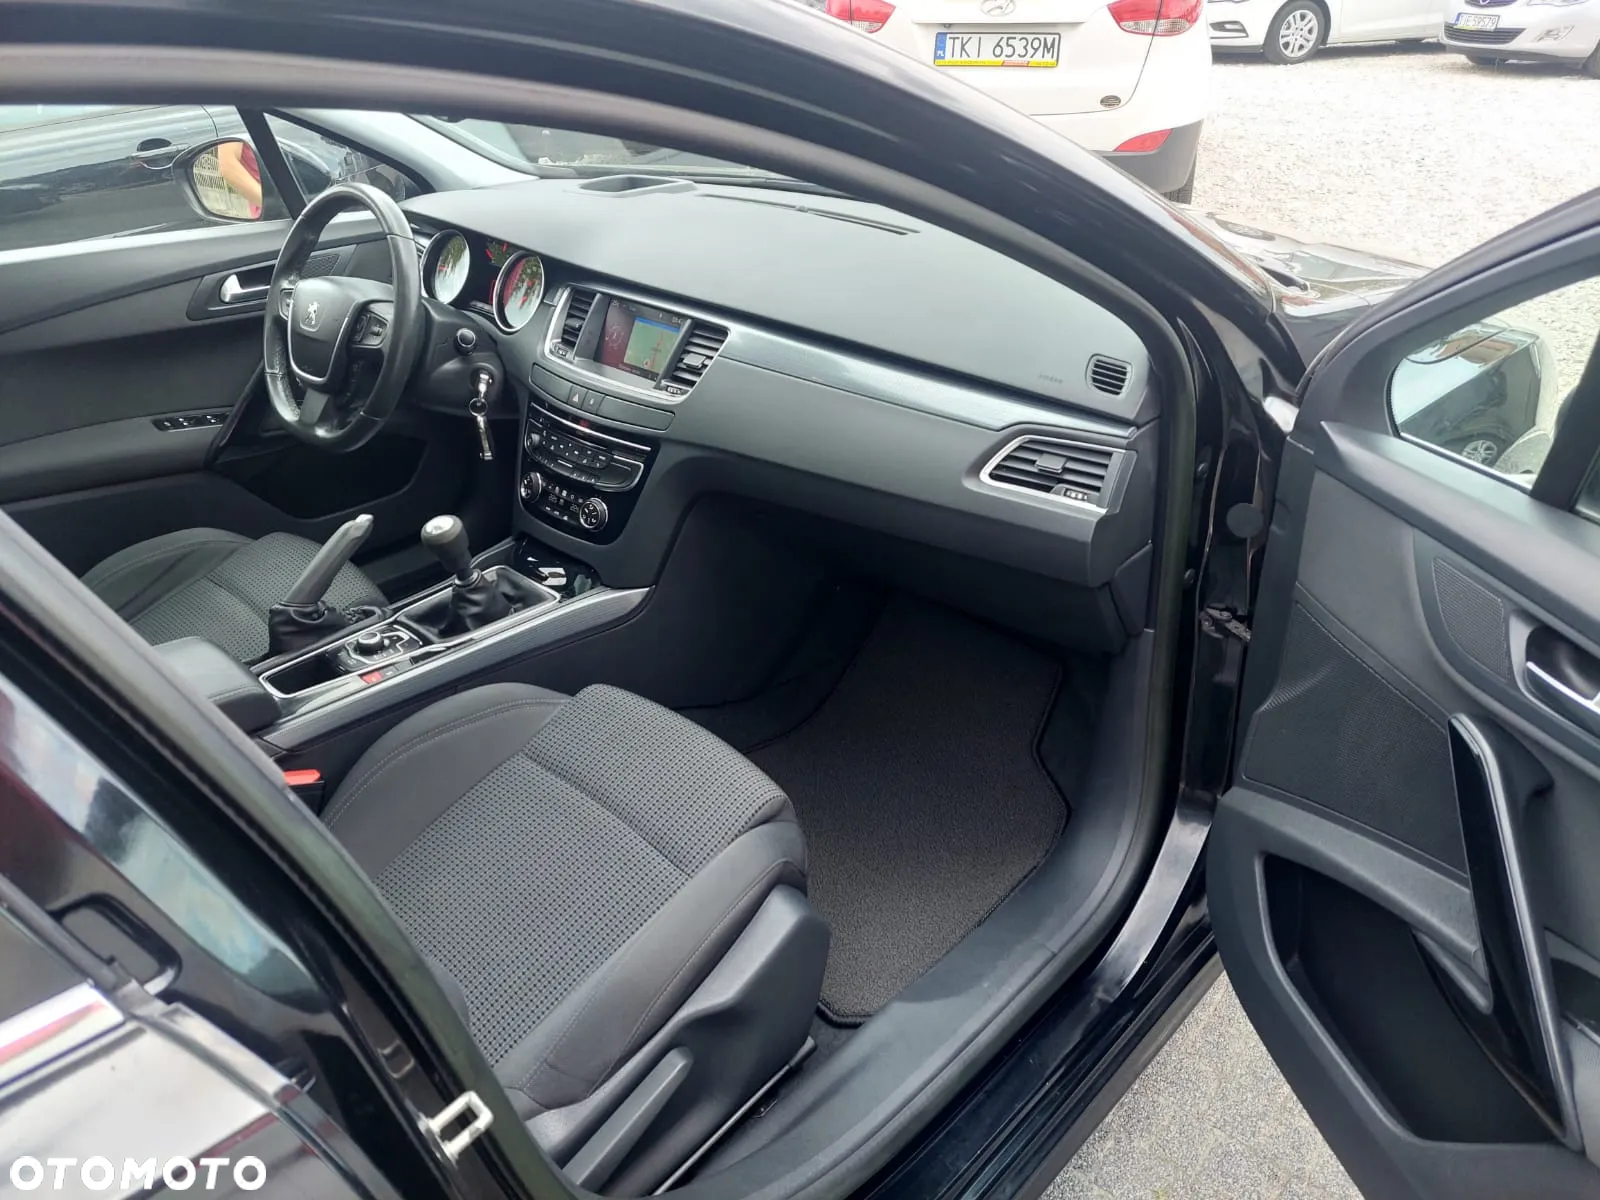 Peugeot 508 SW HDi 160 Business-Line - 23